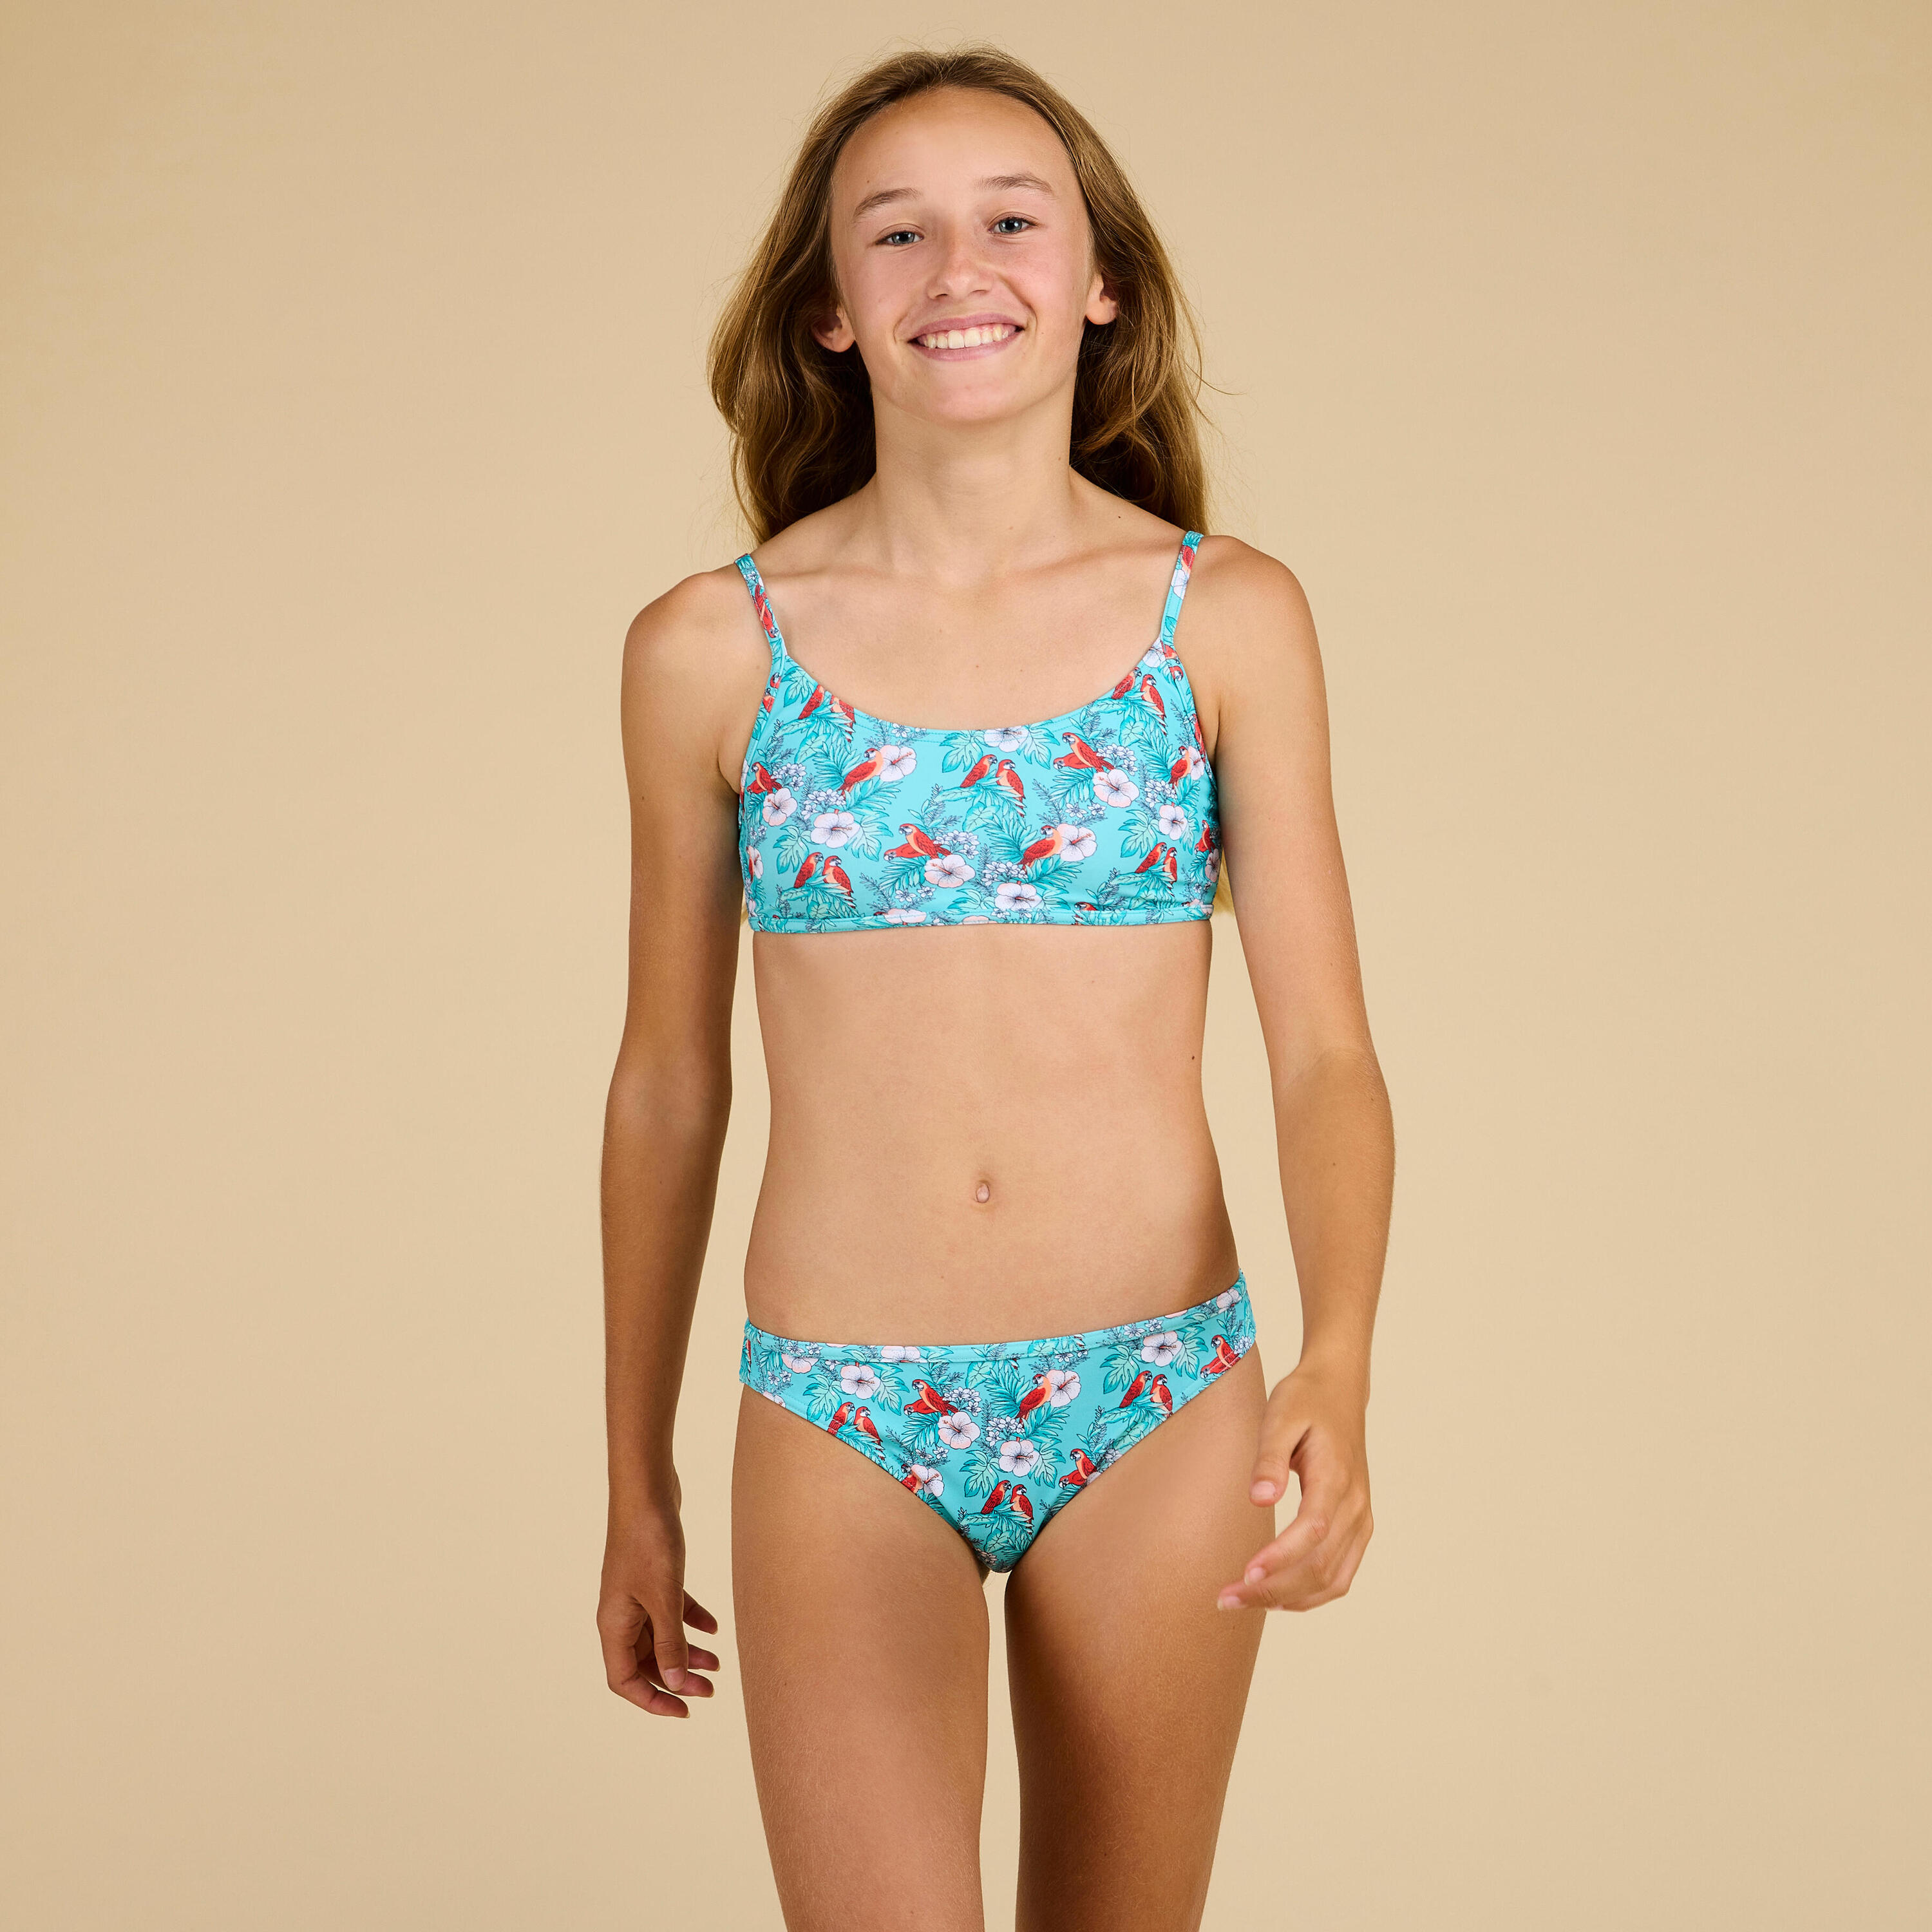 GIRL'S SWIMSUIT CROP TOP 100 COCO TURQUOISE 4/5